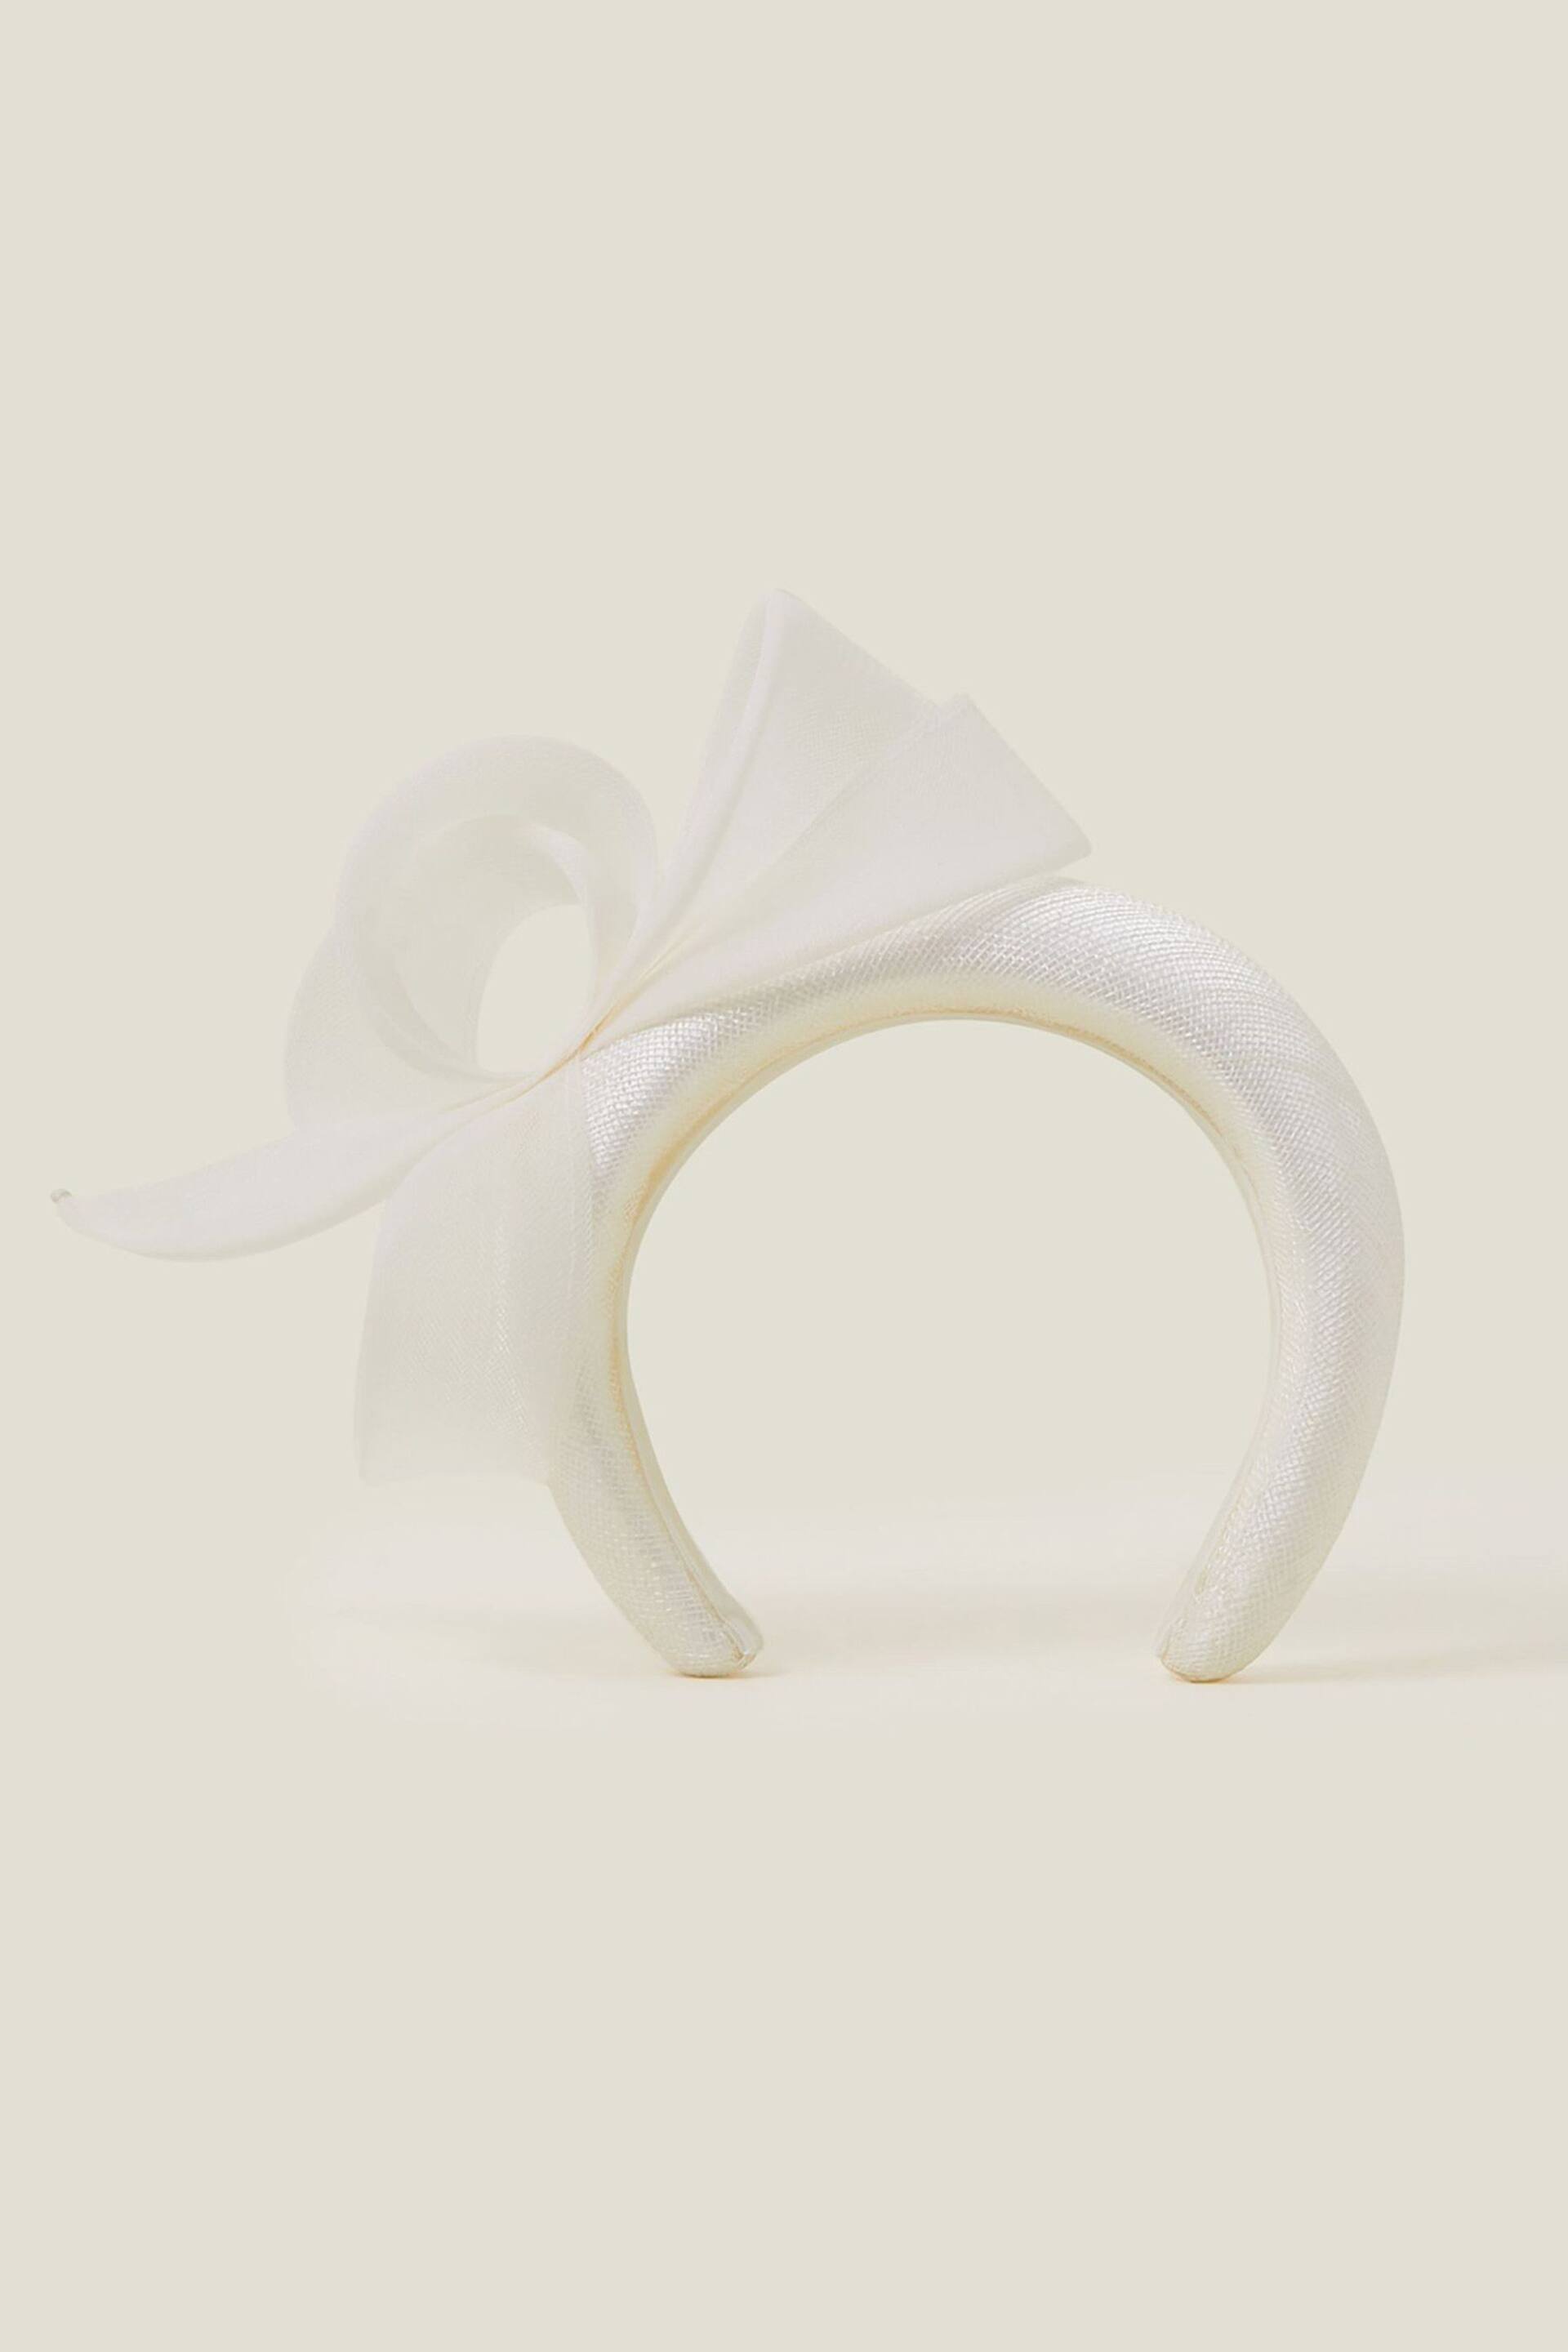 Accessorize Natural Beatrice Occasion Headband - Image 1 of 4